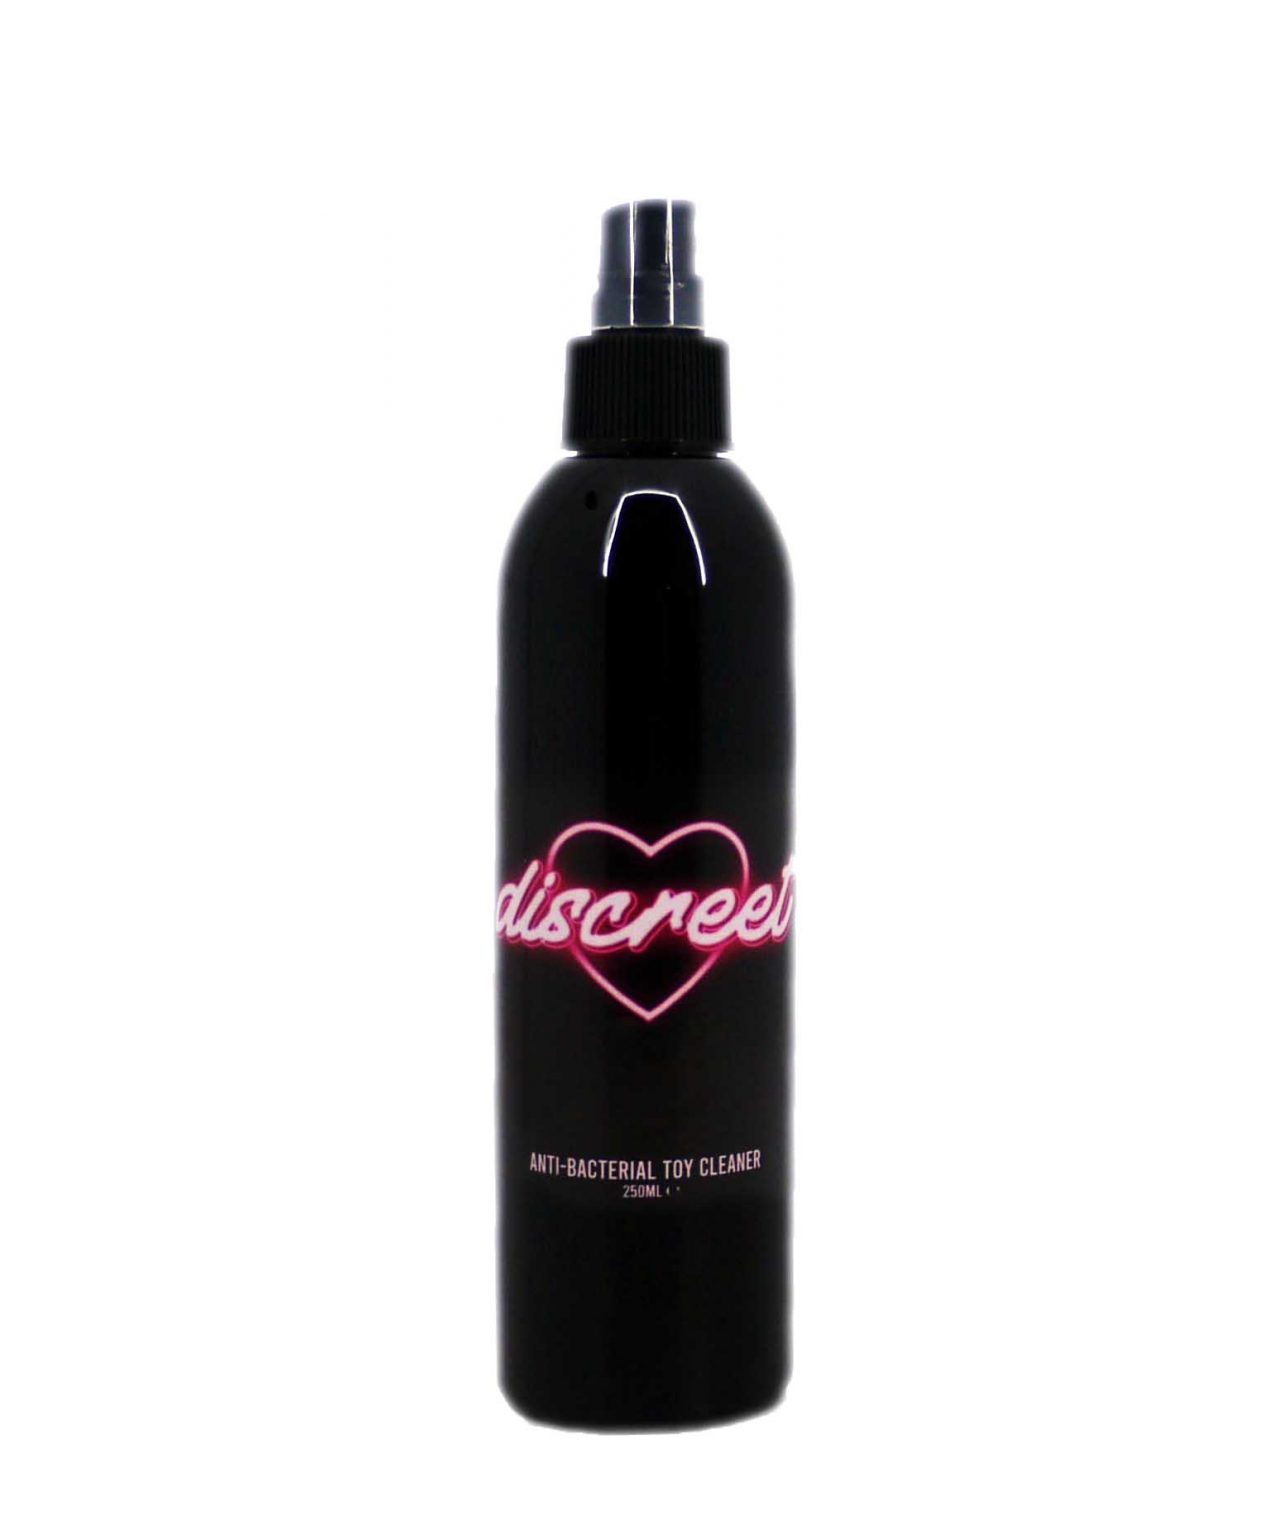 Sex Toy Cleaner Discreet 250ml Spray Trade Chemicals